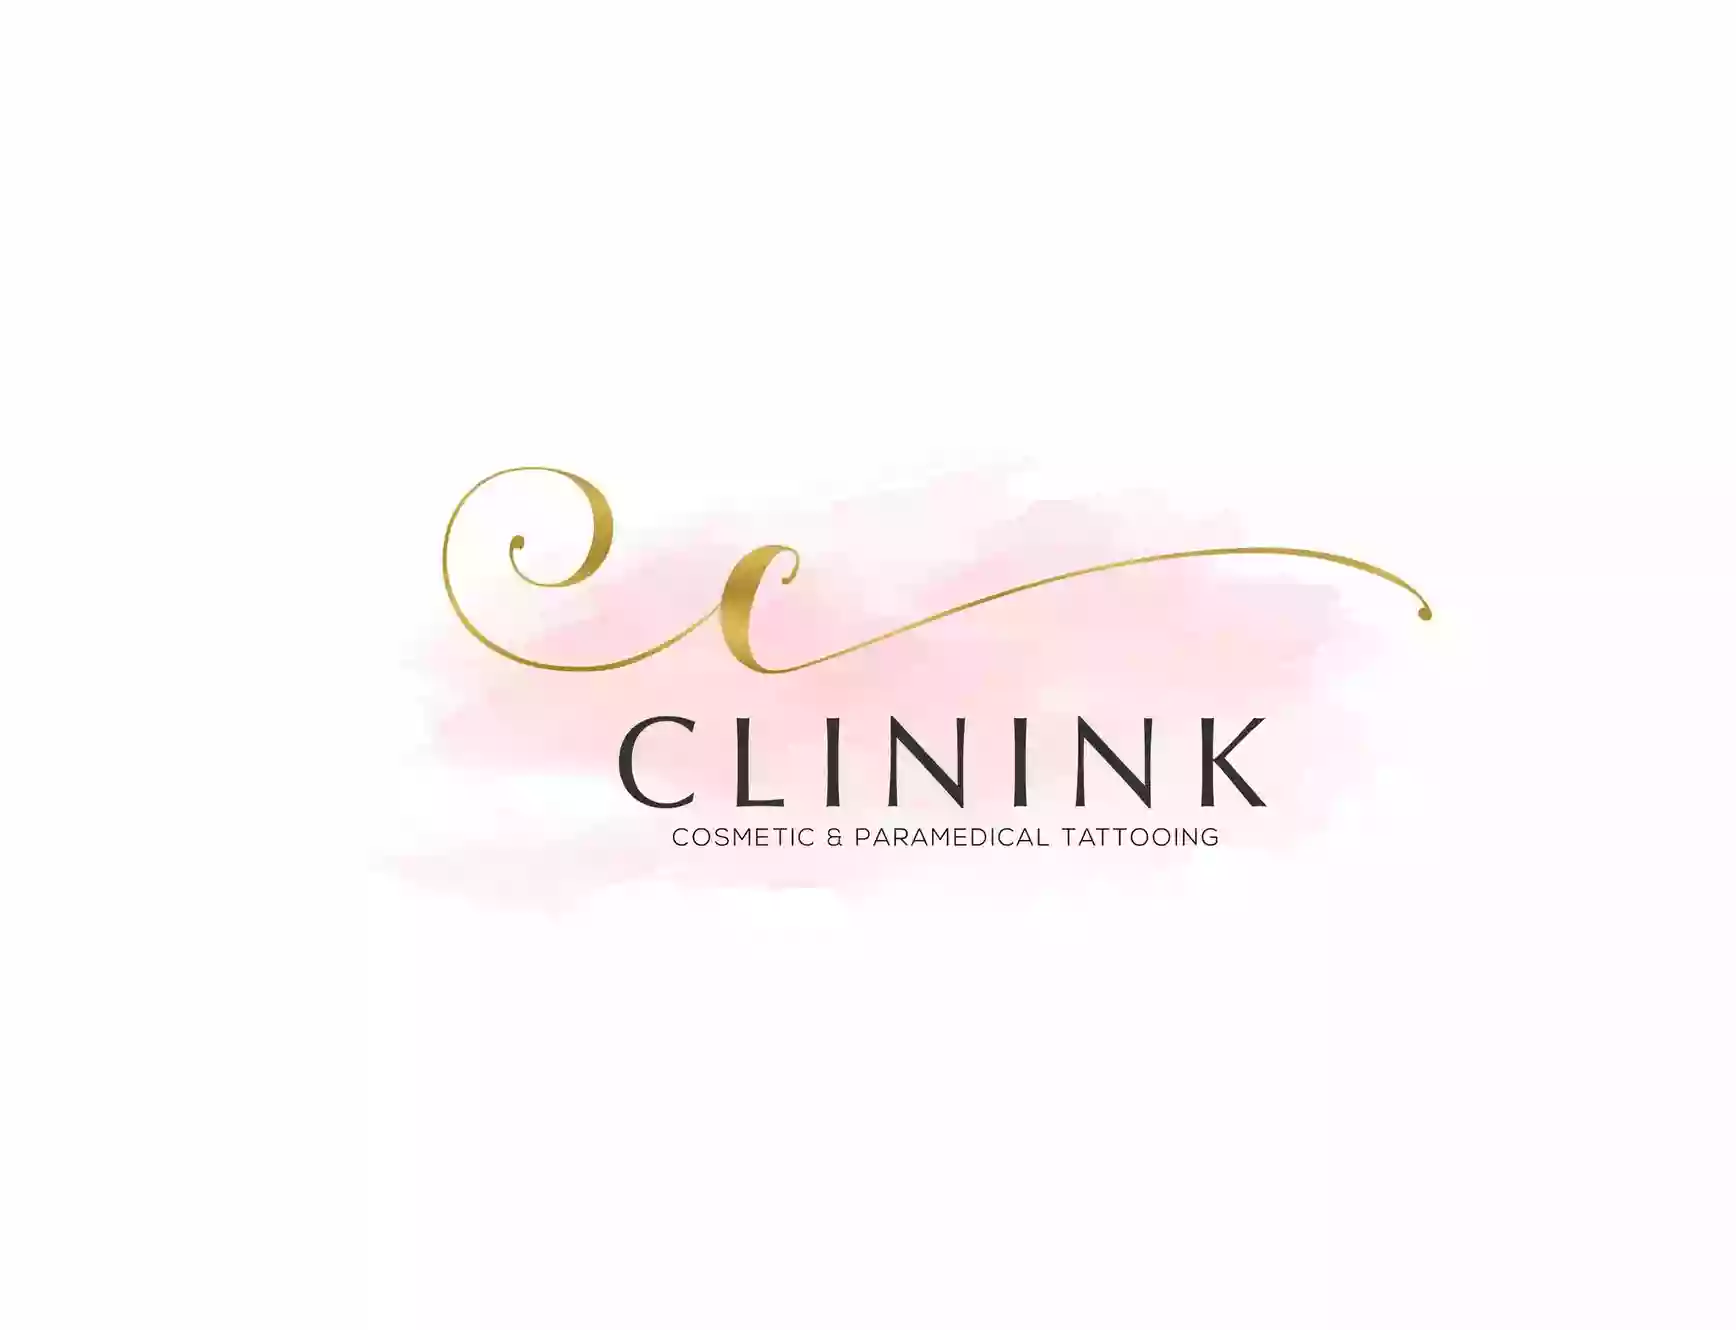 Clinink Cosmetic Tattooing